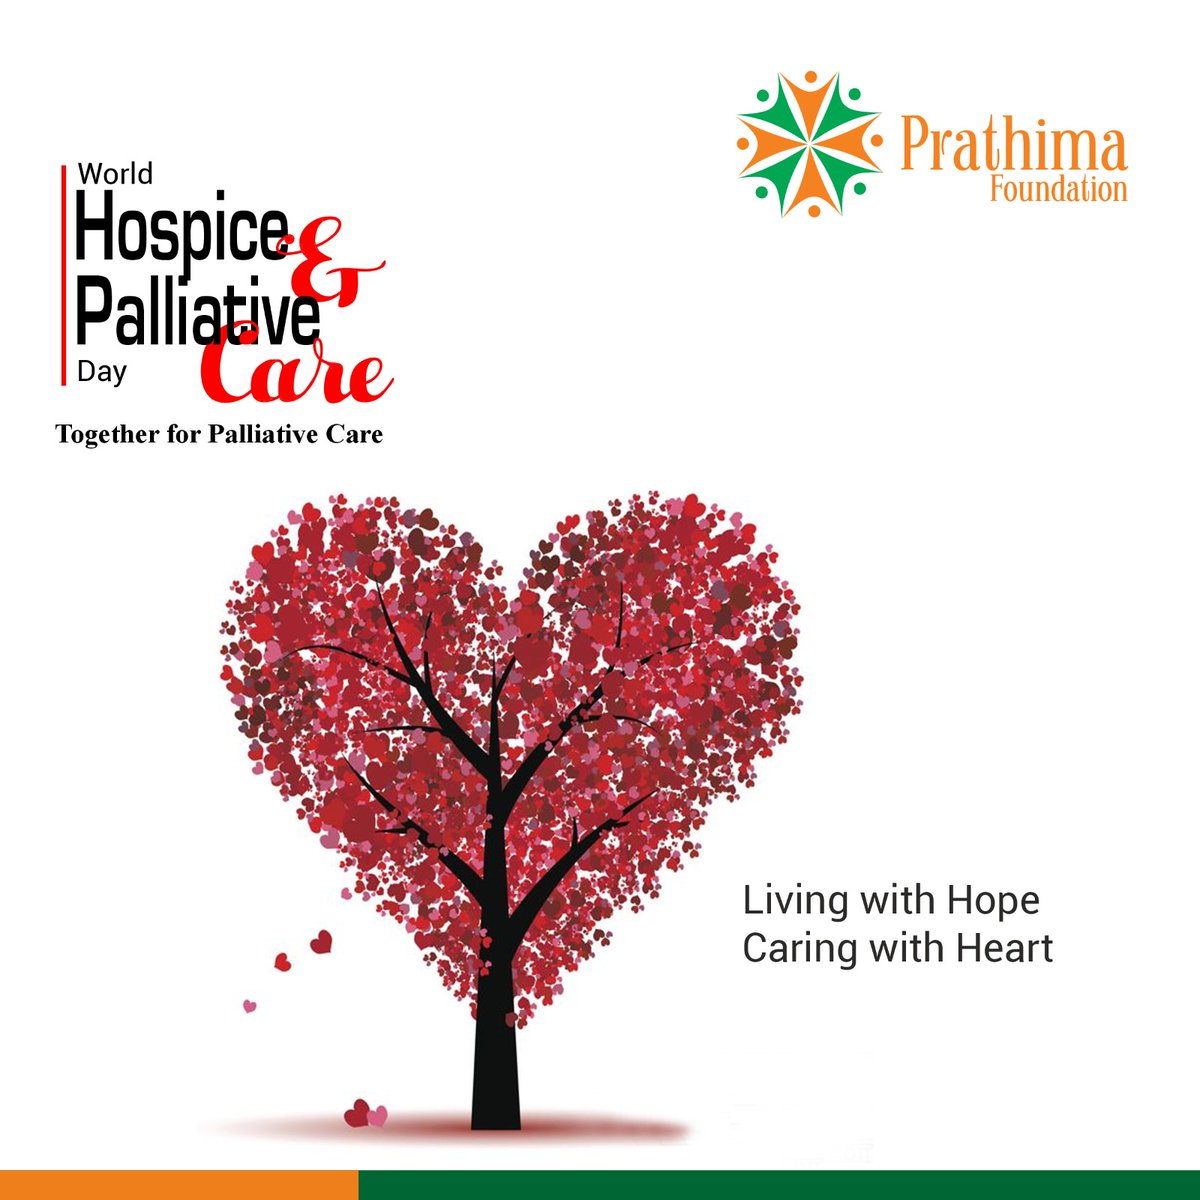 Living with Hope Caring with Heart.

#HospiceCare #PalliativeCare #QualityofLife #EndOfLifeCare #HospiceSupport #Caregivers #ComfortCare #WHPD #HospiceHeroes #trending #trendingnow #prathimafpundation #prathima #PF